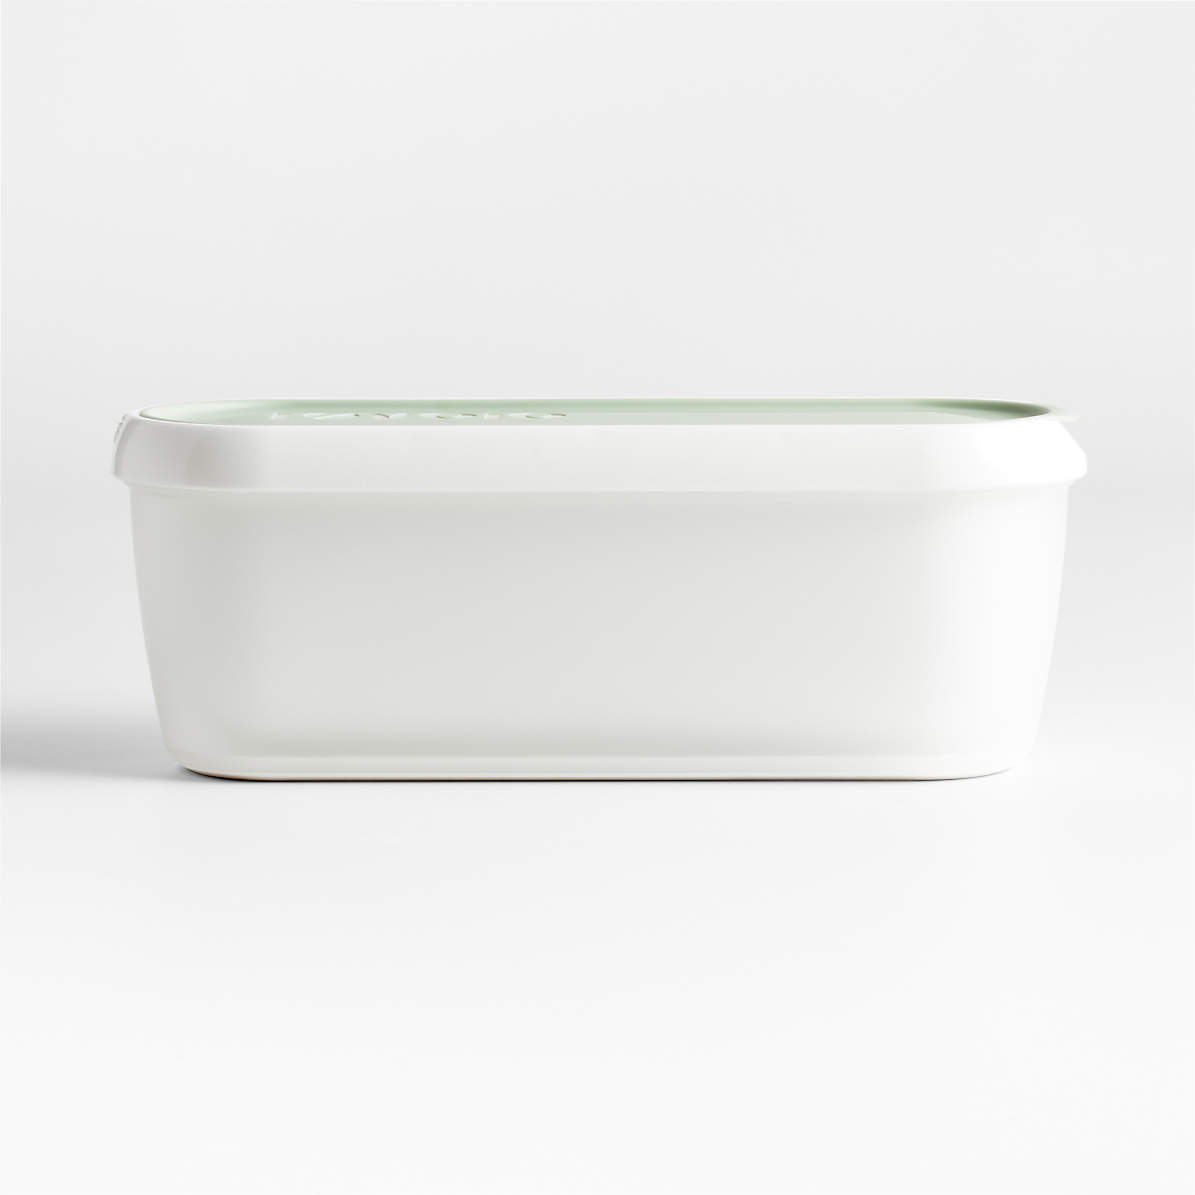 Tovolo Glide A Scoop 1.5 qt Green Oblong Oval Freezer Ice Cream Tub  Container